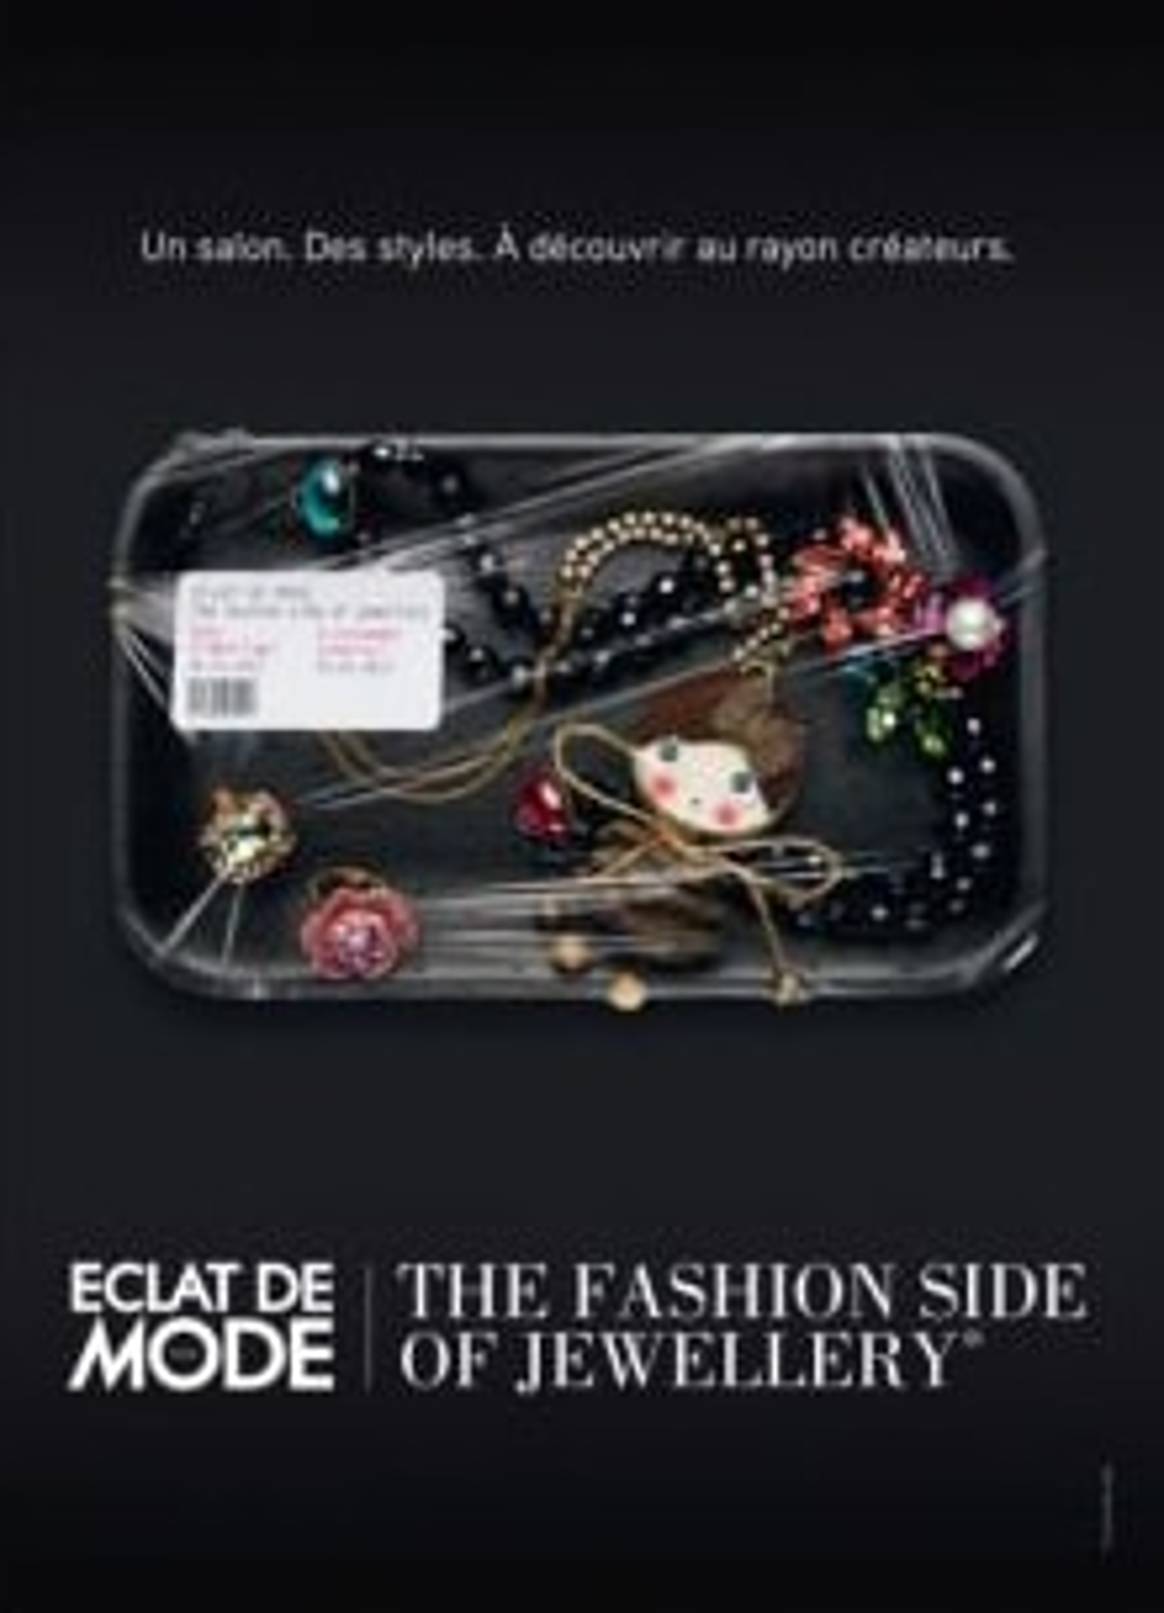 Eclat de Mode from 20th to 23rd January